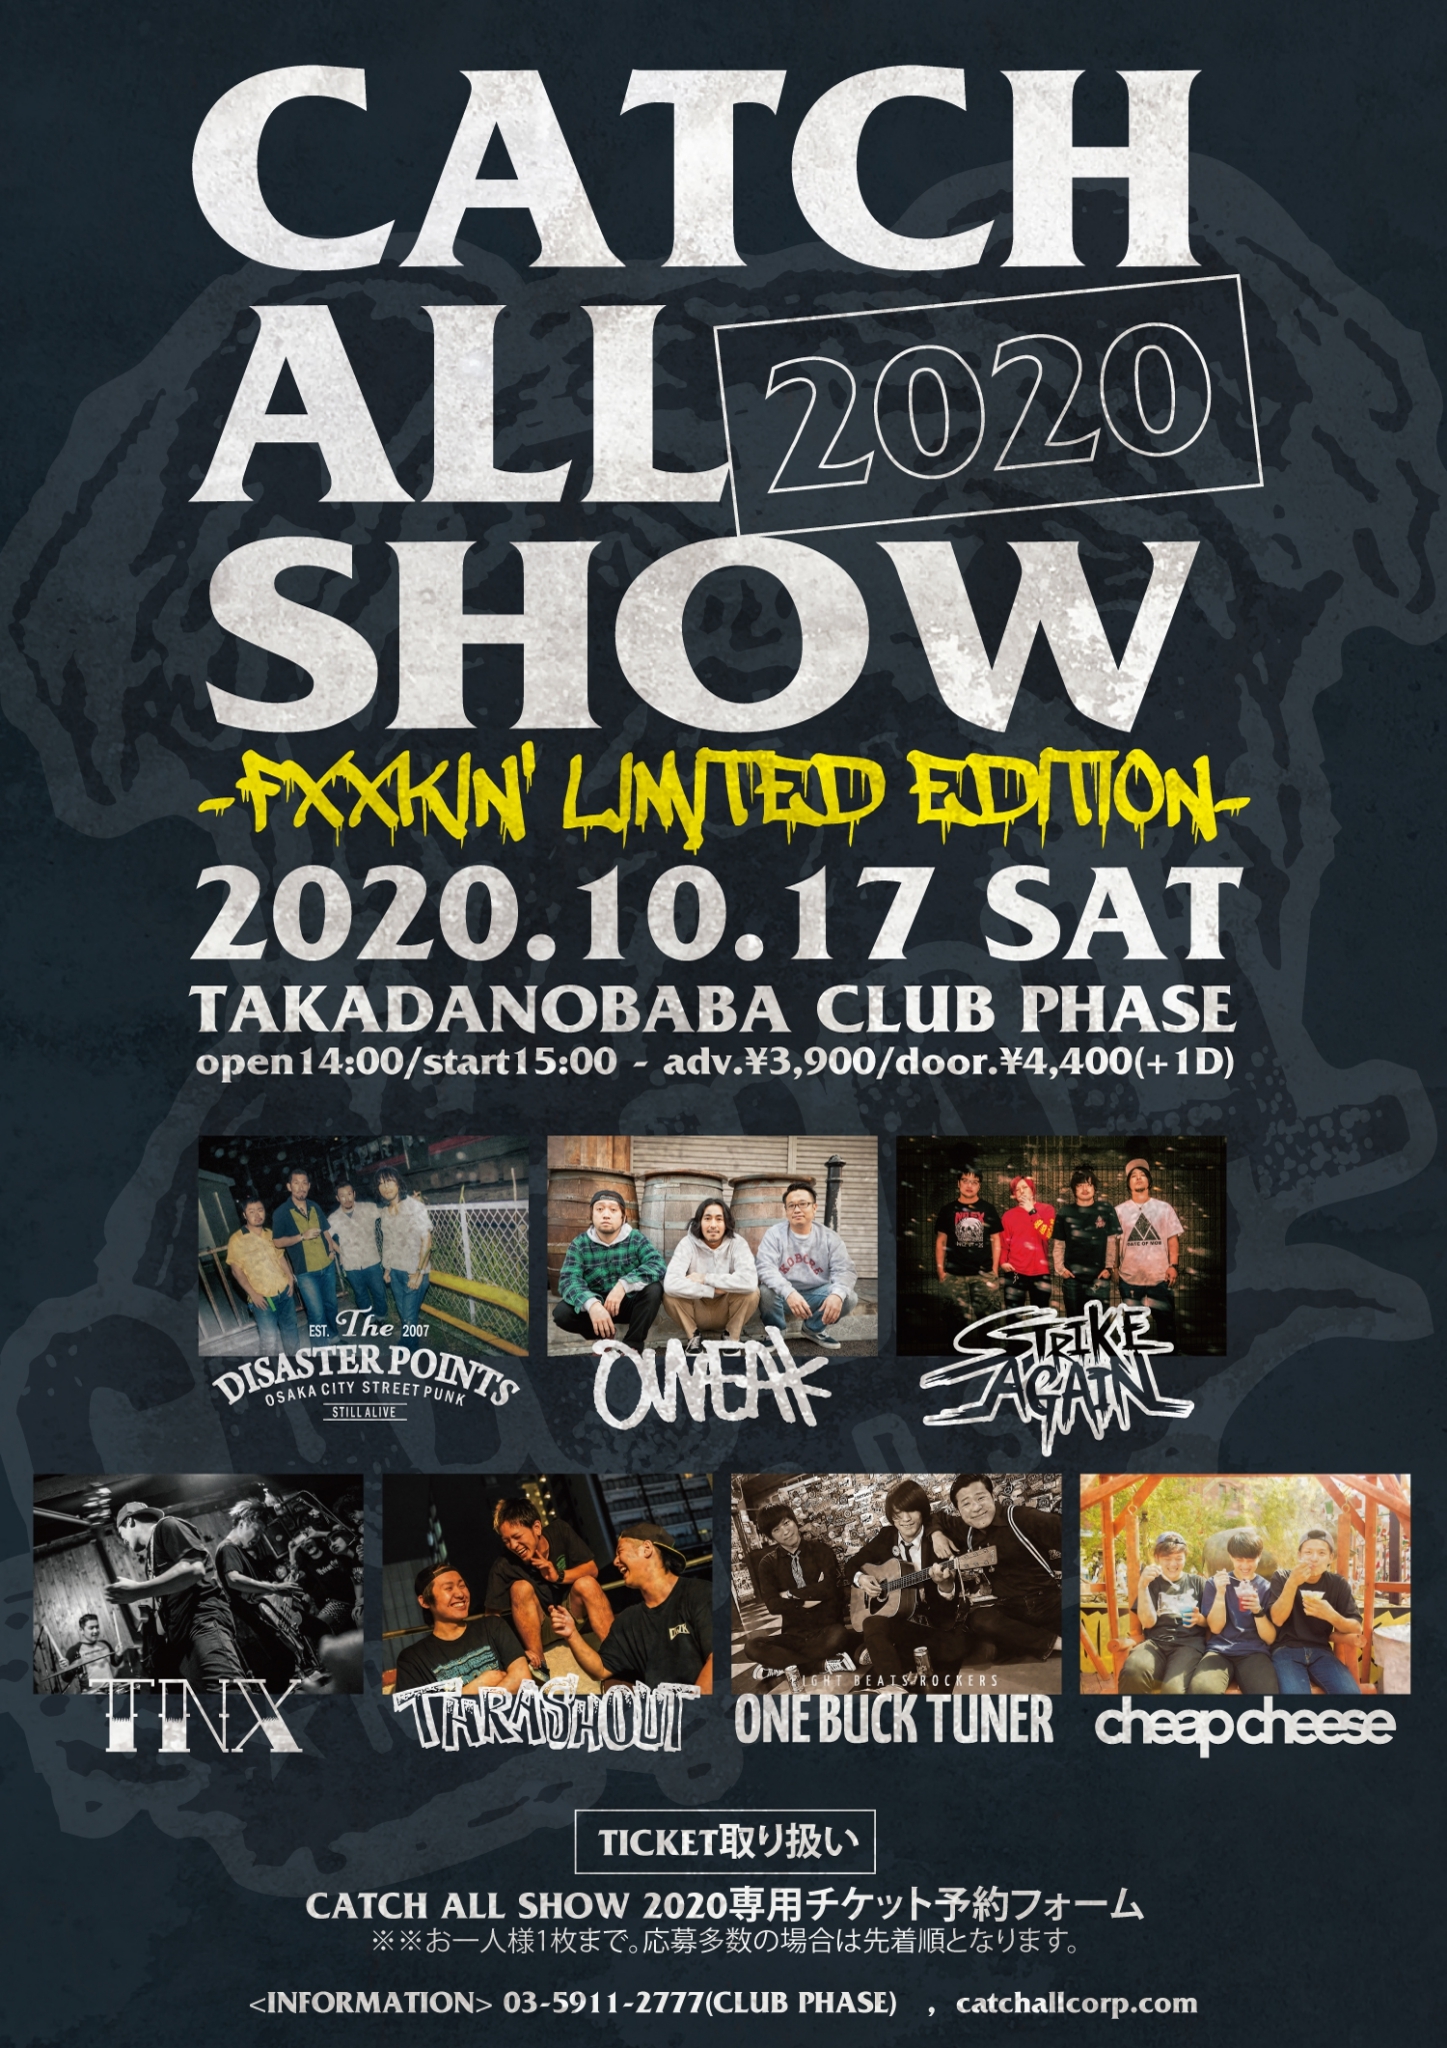 CATCH ALL SHOW 2020 チケット追加